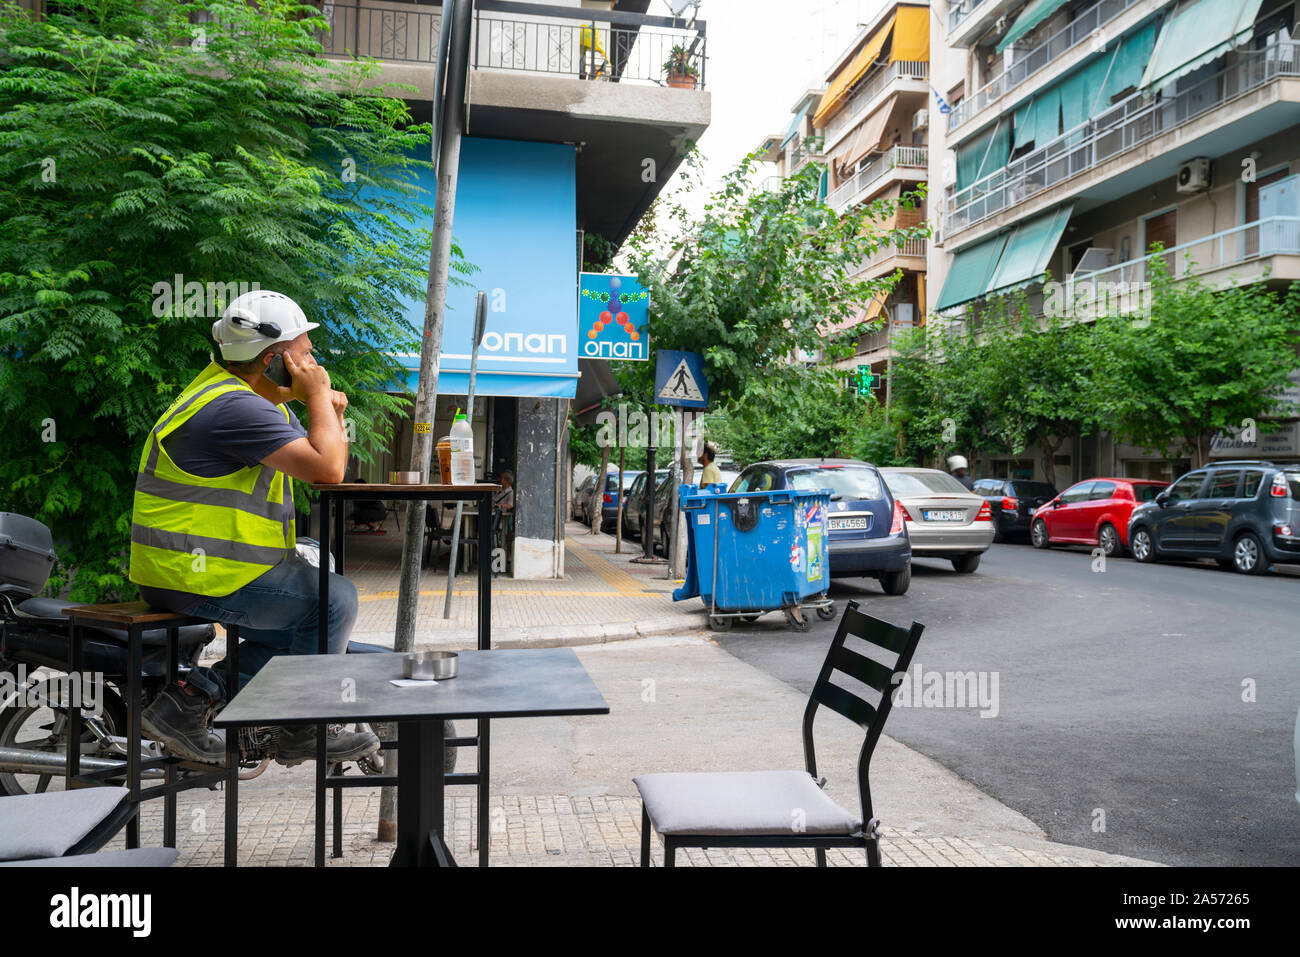 Athens Greece July 17 2019; Man sitting on stool outside cafe wearing high visibility vest, hard hat and holding mobile phone to his ear. Stock Photo